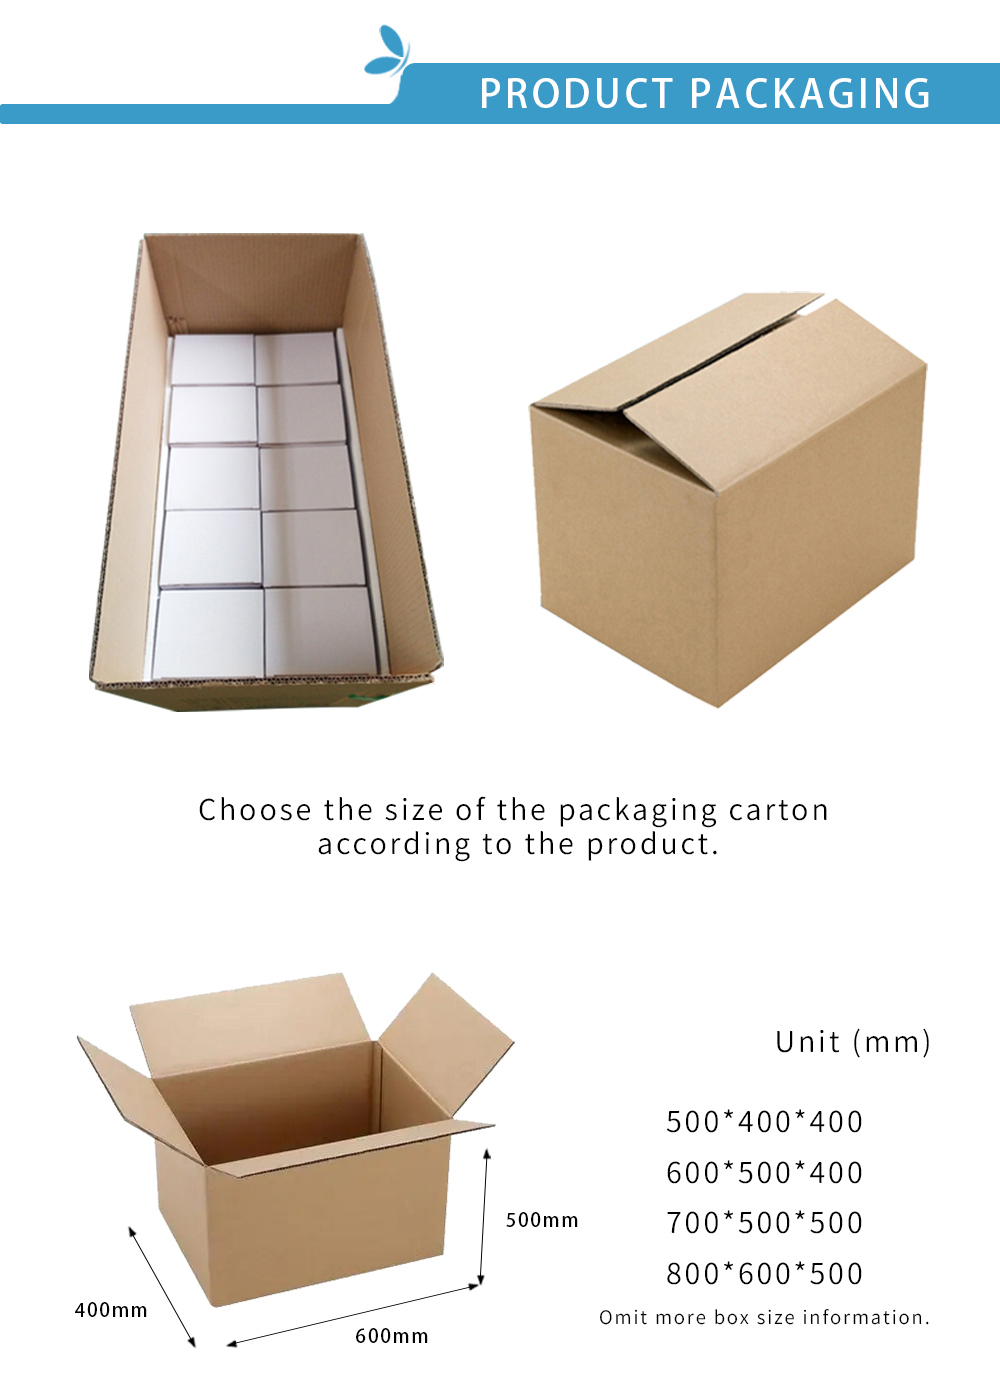 4. Six-color lipstick packing box